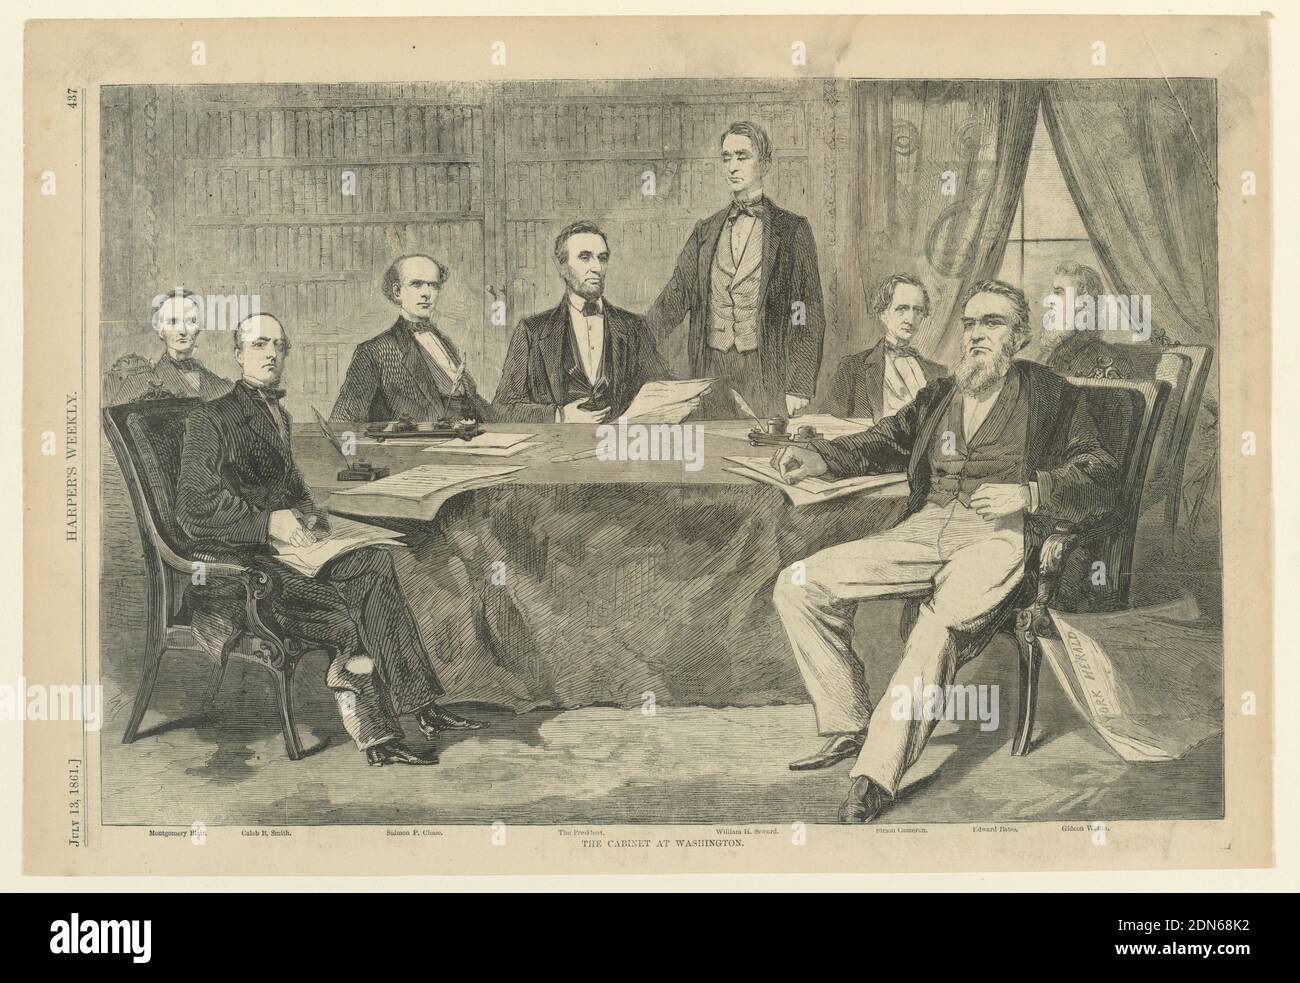 President Lincoln and His Cabinet Members at Washington, D.C., from Harper's Weekly, July 13, 1861, p. 437., Unknown, American, Wood engraving in black ink on newsprint paper, Horizontal view of an interior with President Lincoln and his cabinet seated around a table and facing the spectator. Secretary Seward stands behind the President and the names of the other cabinet members are indicated in the margin below., Washington, District of Columbia, USA, July 13, 1861, graphic design, Print Stock Photo